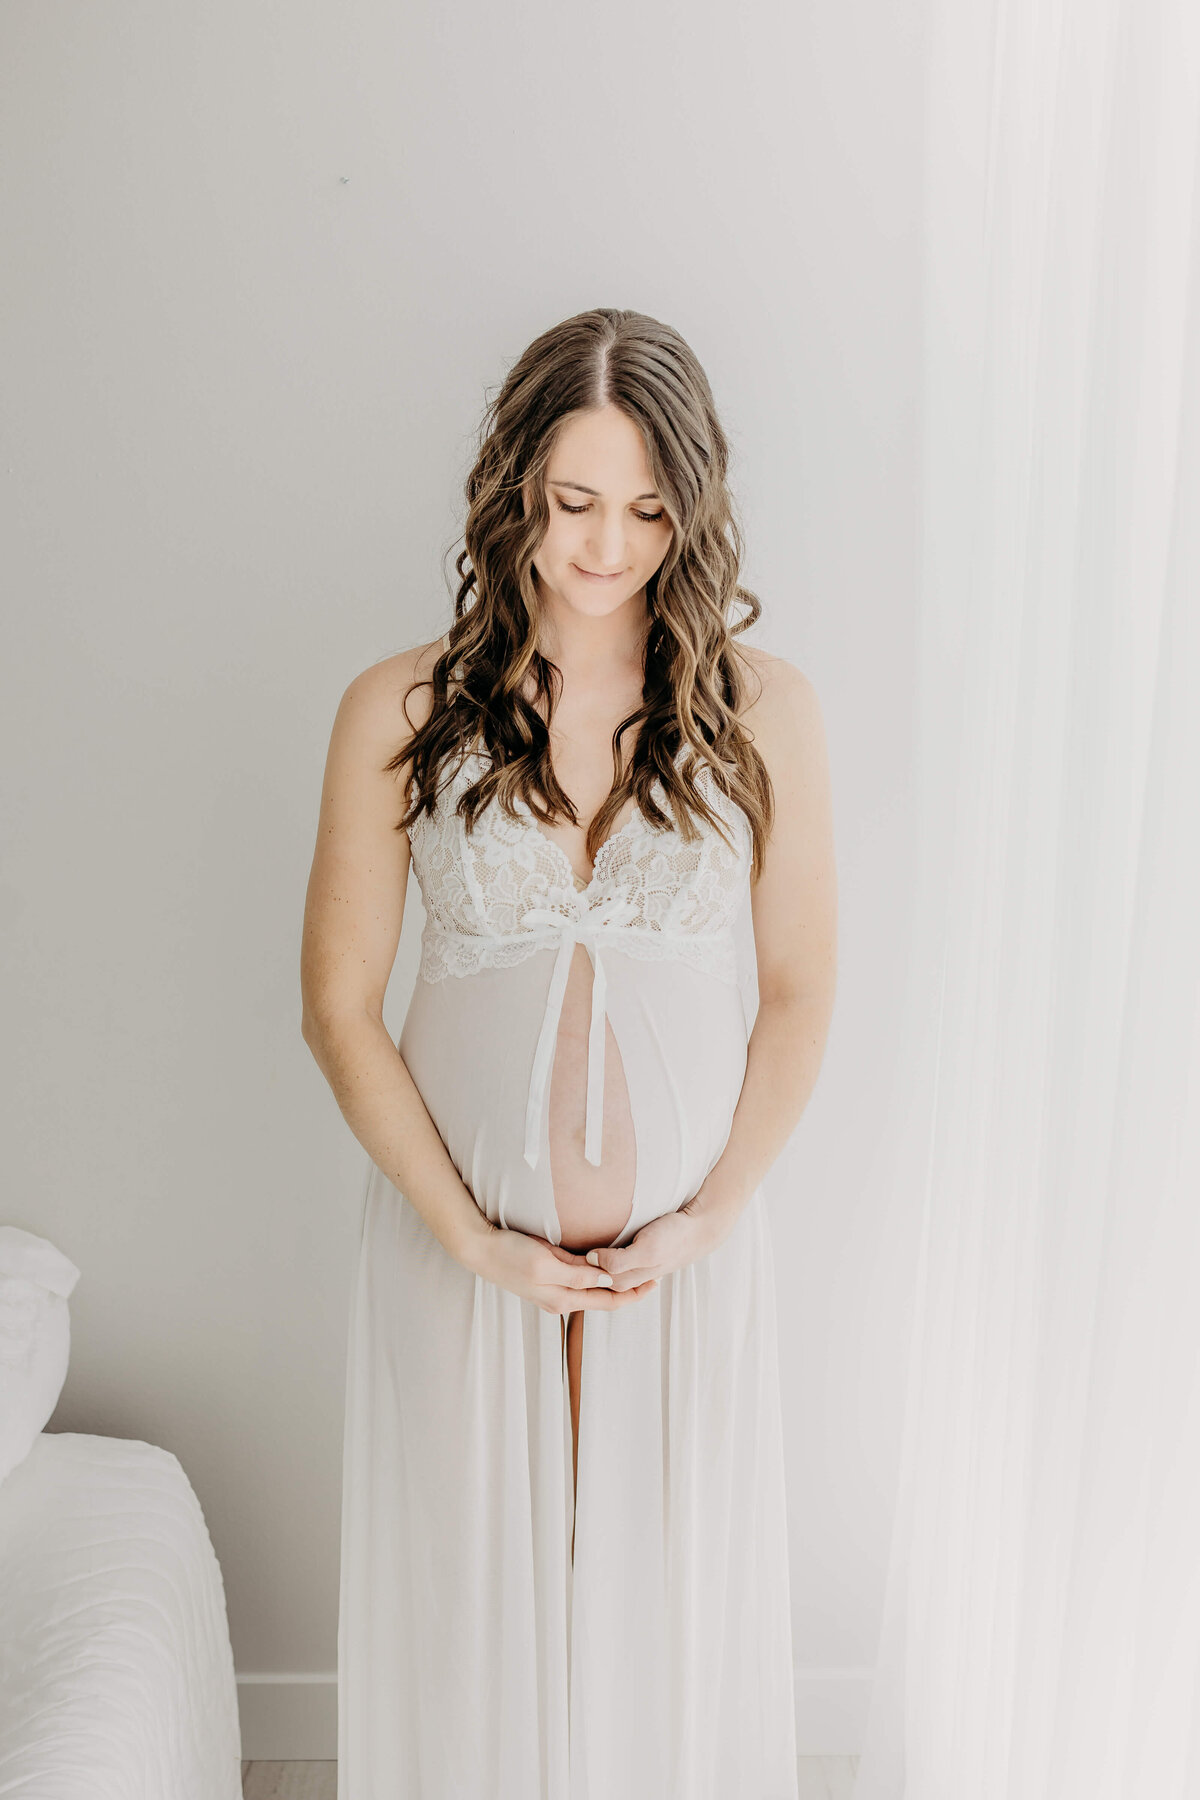 Maternity session brunette woman in white looking down